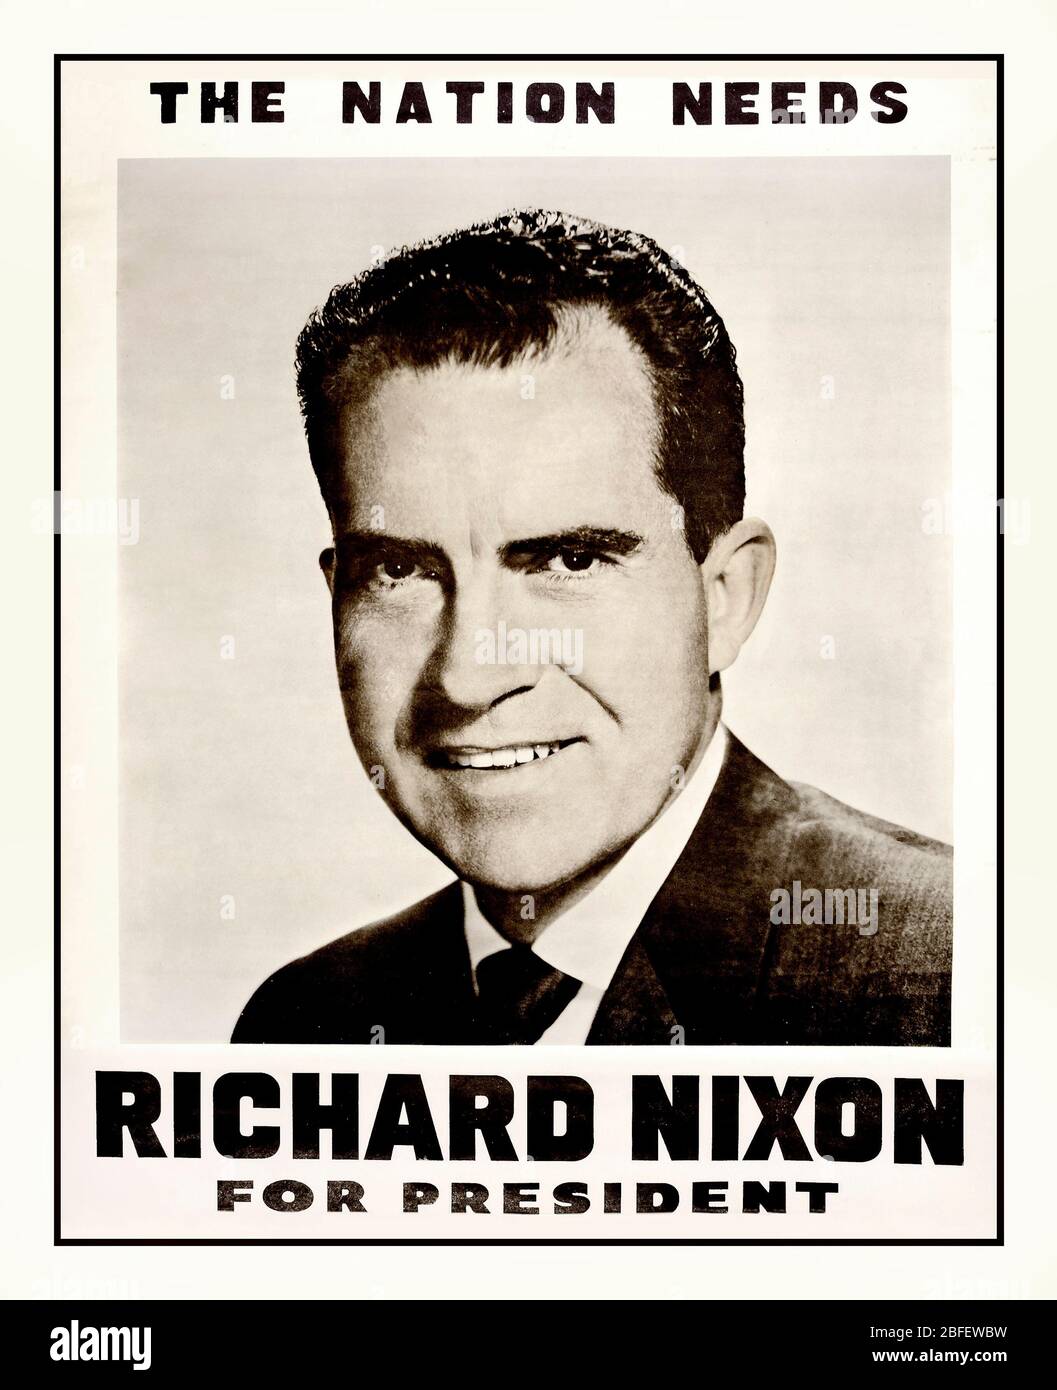 1960's Richard Nixon Presidential Campaign Poster - 'Nation Needs Nixon' RICHARD NIXON for president Richard Milhous Nixon was the 37th president of the United States, serving from 1969 until 1974 Stock Photo